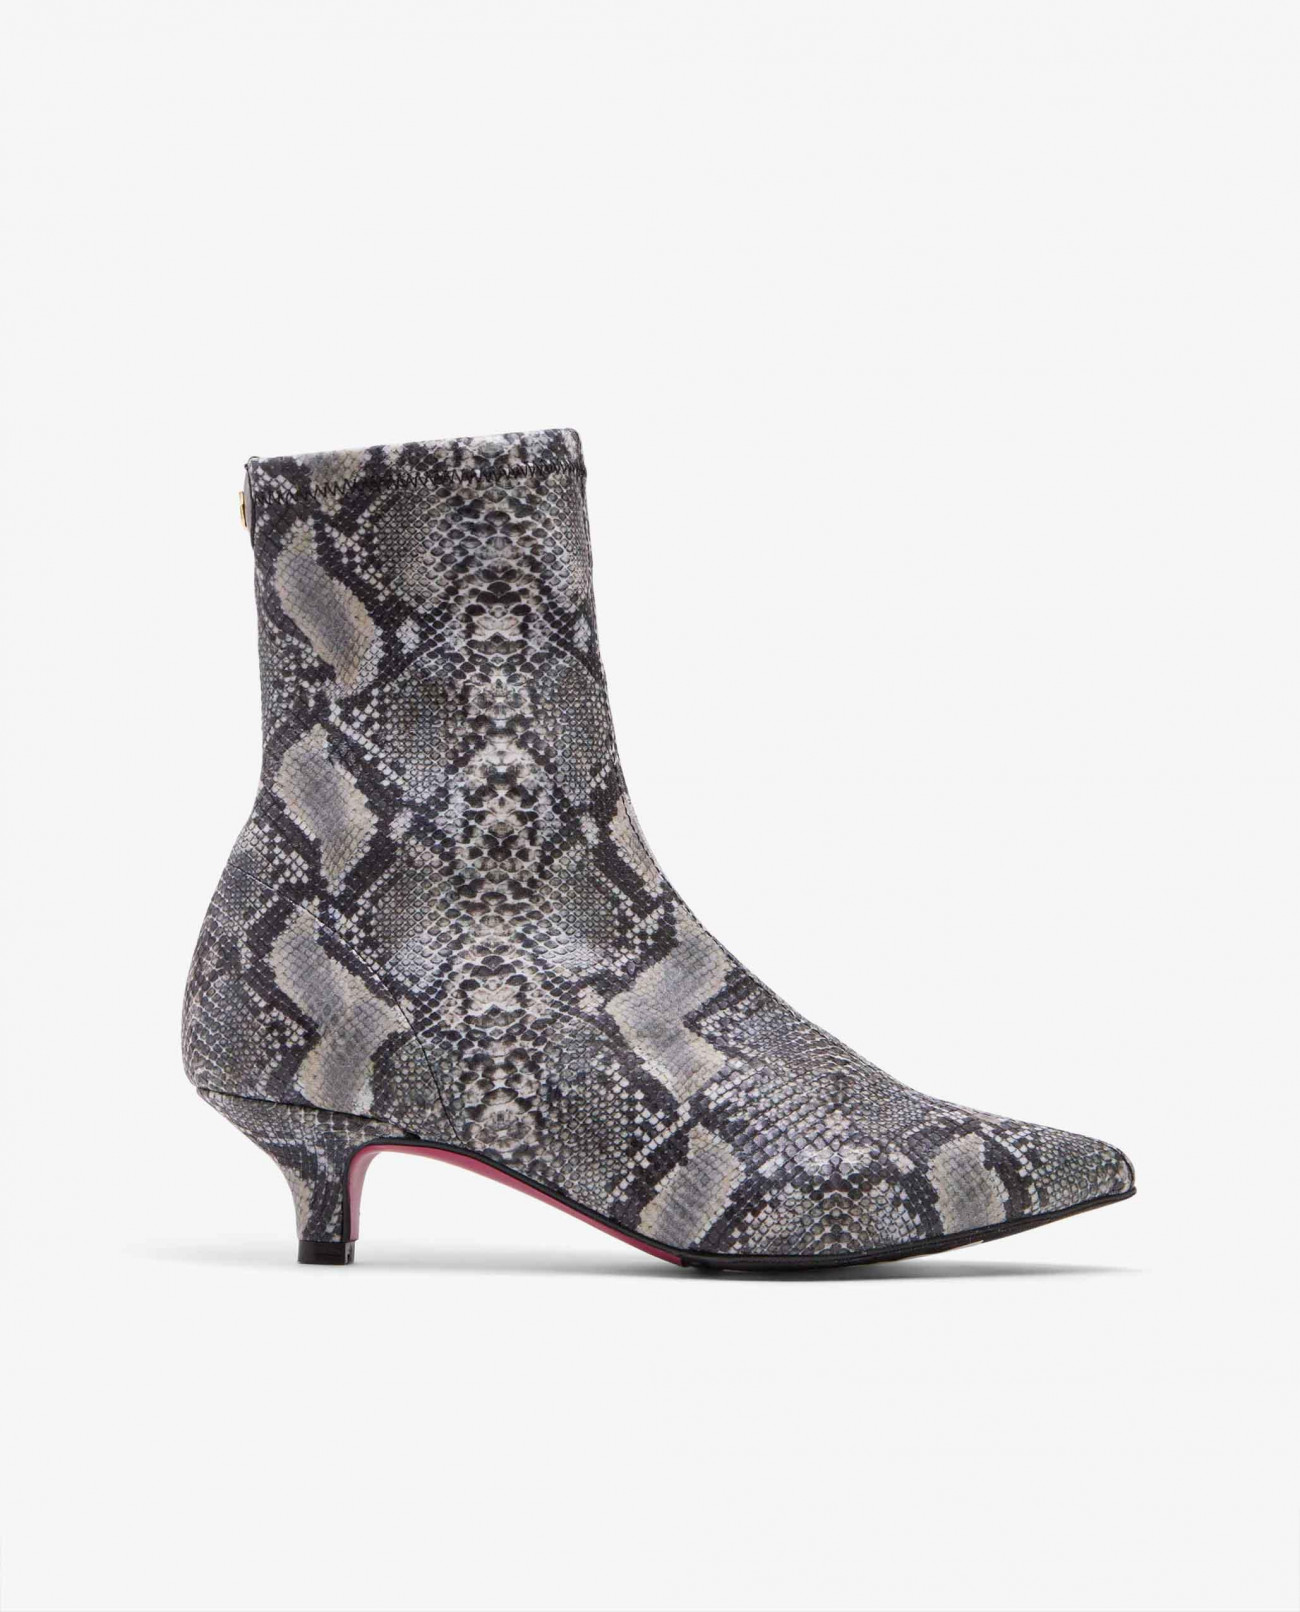 LOW HEEL LYCRA ANKLE BOOT GRAY SNAKE Sizes 37 Colors grey